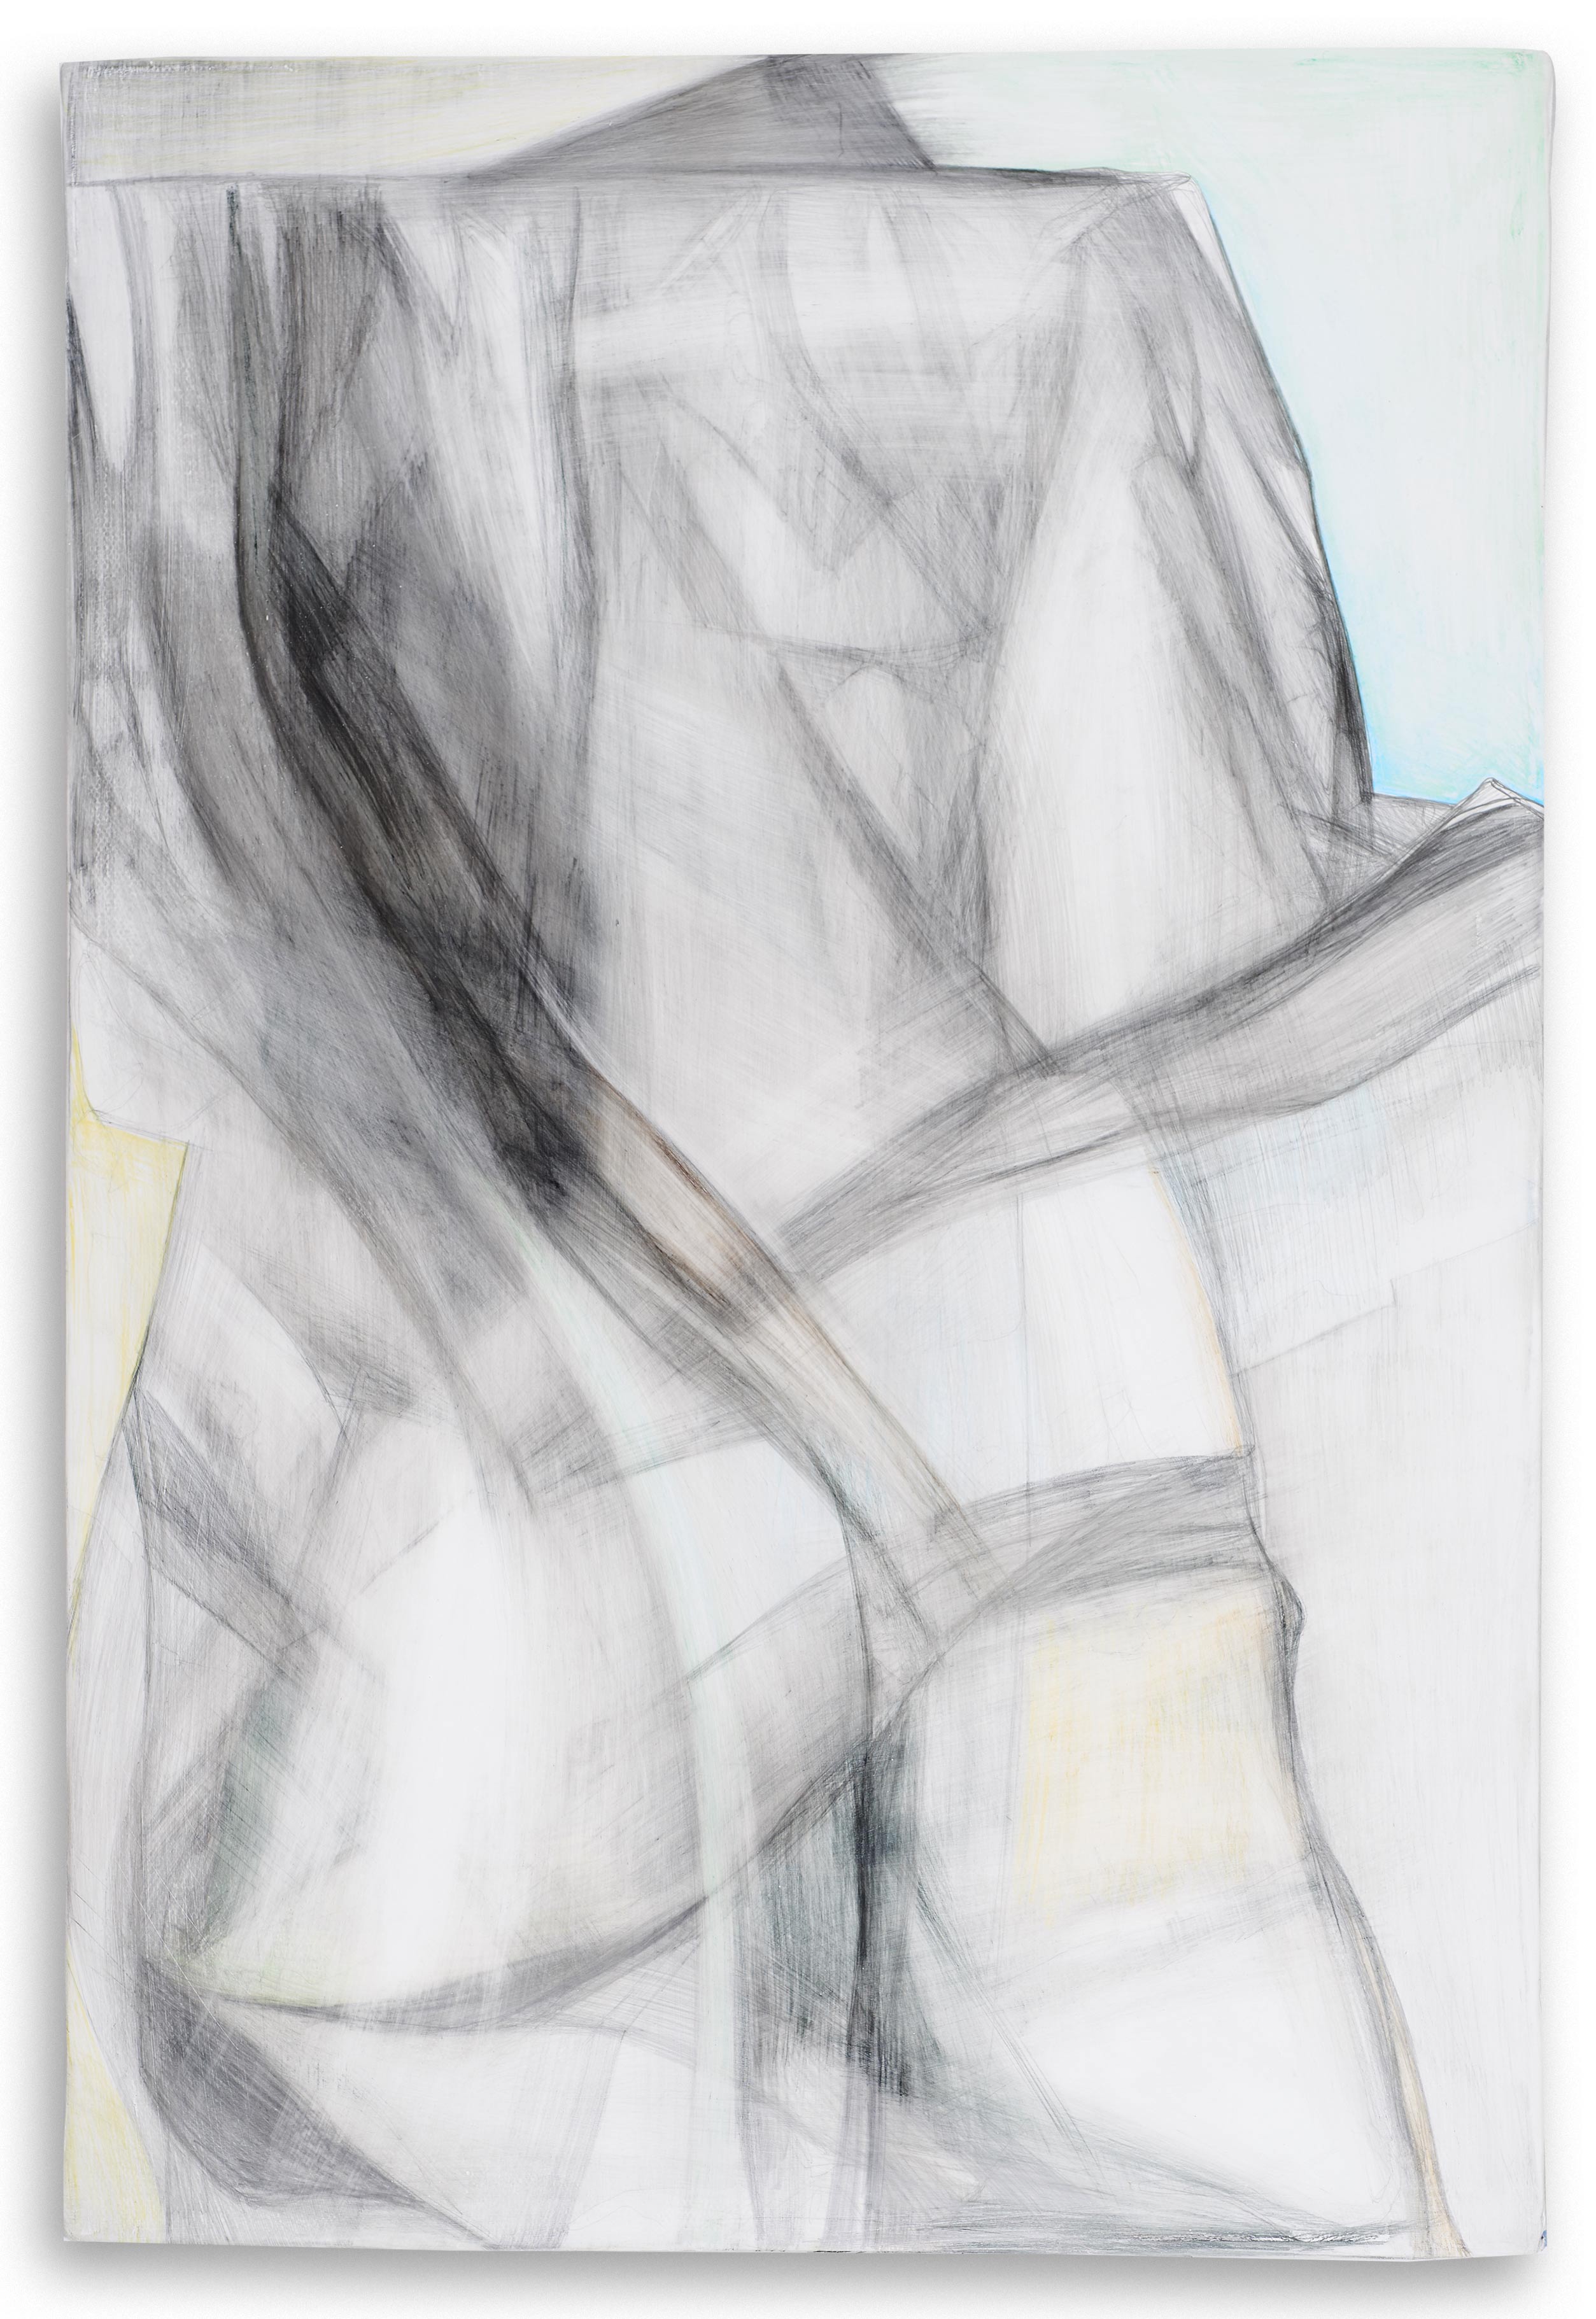 A vertical abstract, delicate pencil drawing with a central abstract angular form by artist Caroline Coolidge.